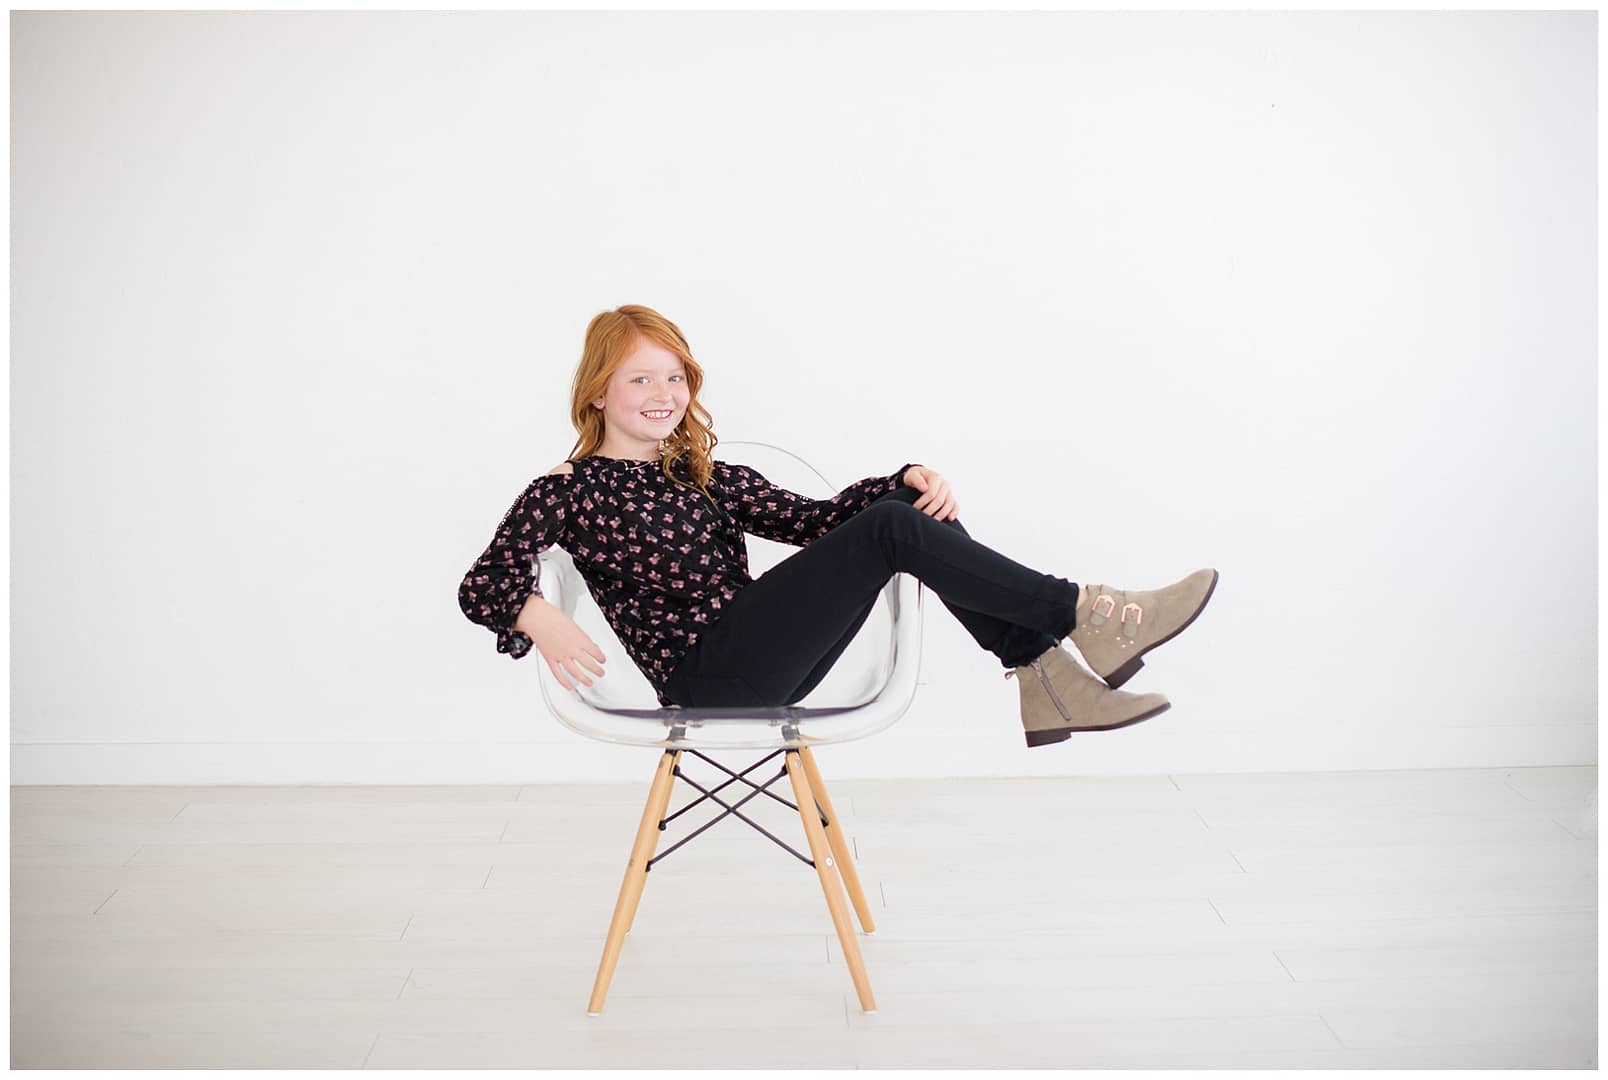 Red headed girl sits in chair for portrait. Photos by Tiffany Hix Photography.